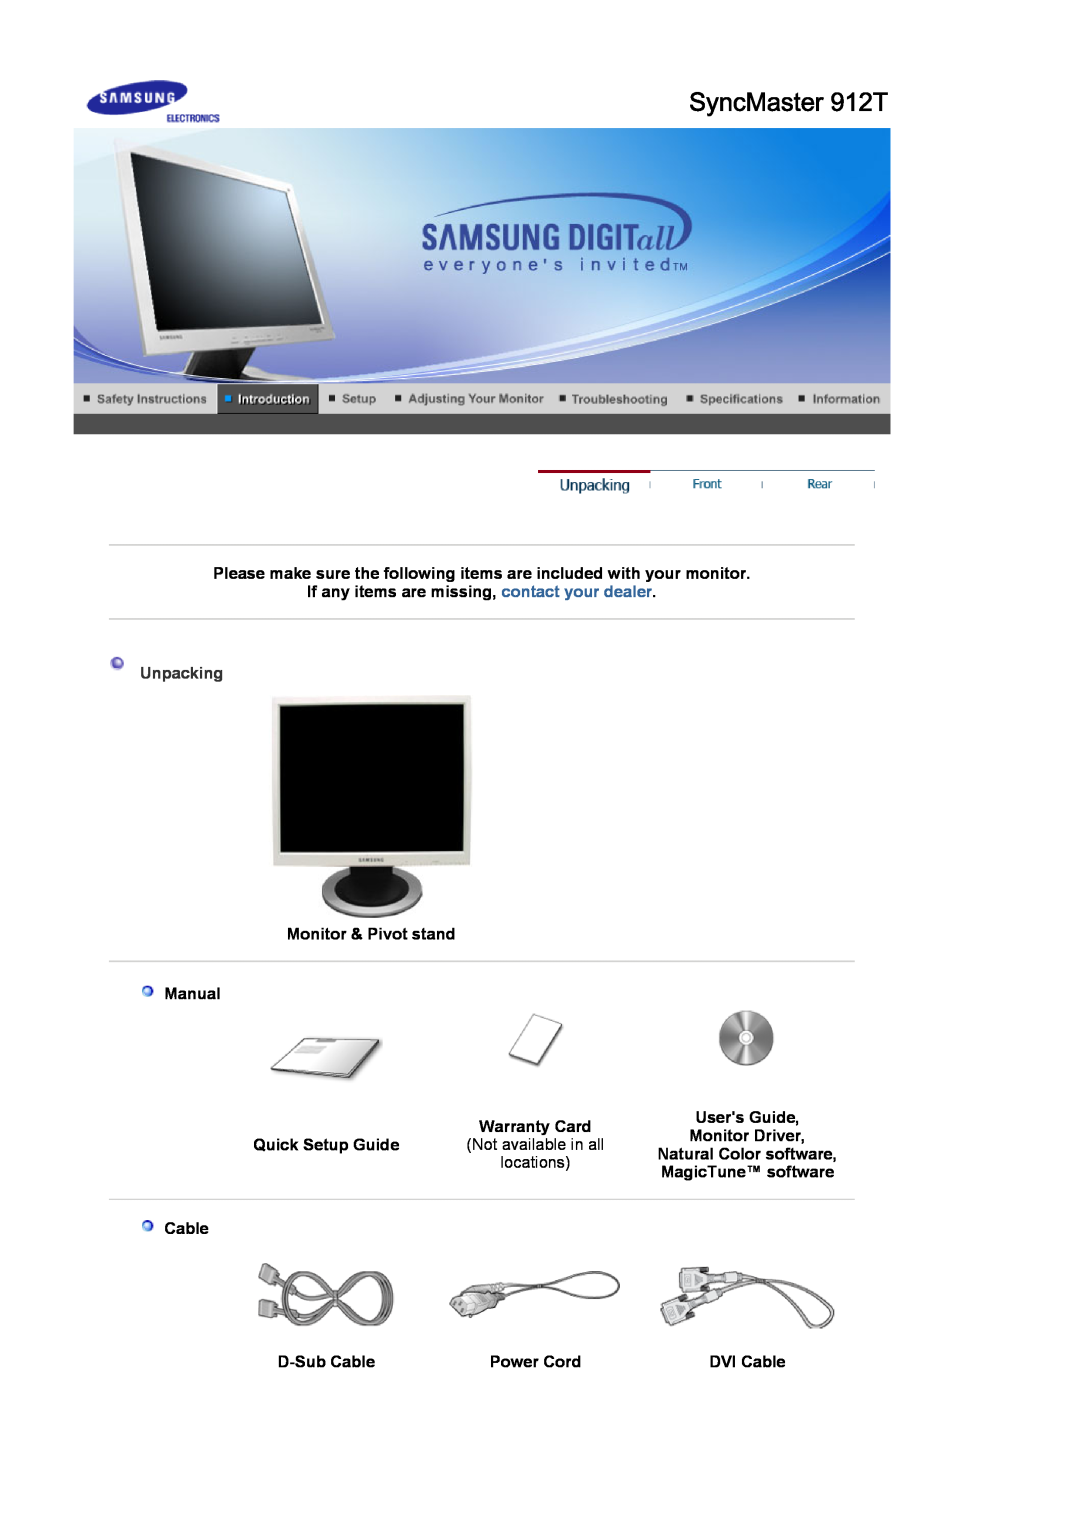 Samsung LS19MJEKSB/XME SyncMaster 912T, Monitor & Pivot stand Manual, DVI Cable, Unpacking, Warranty Card, Users Guide 